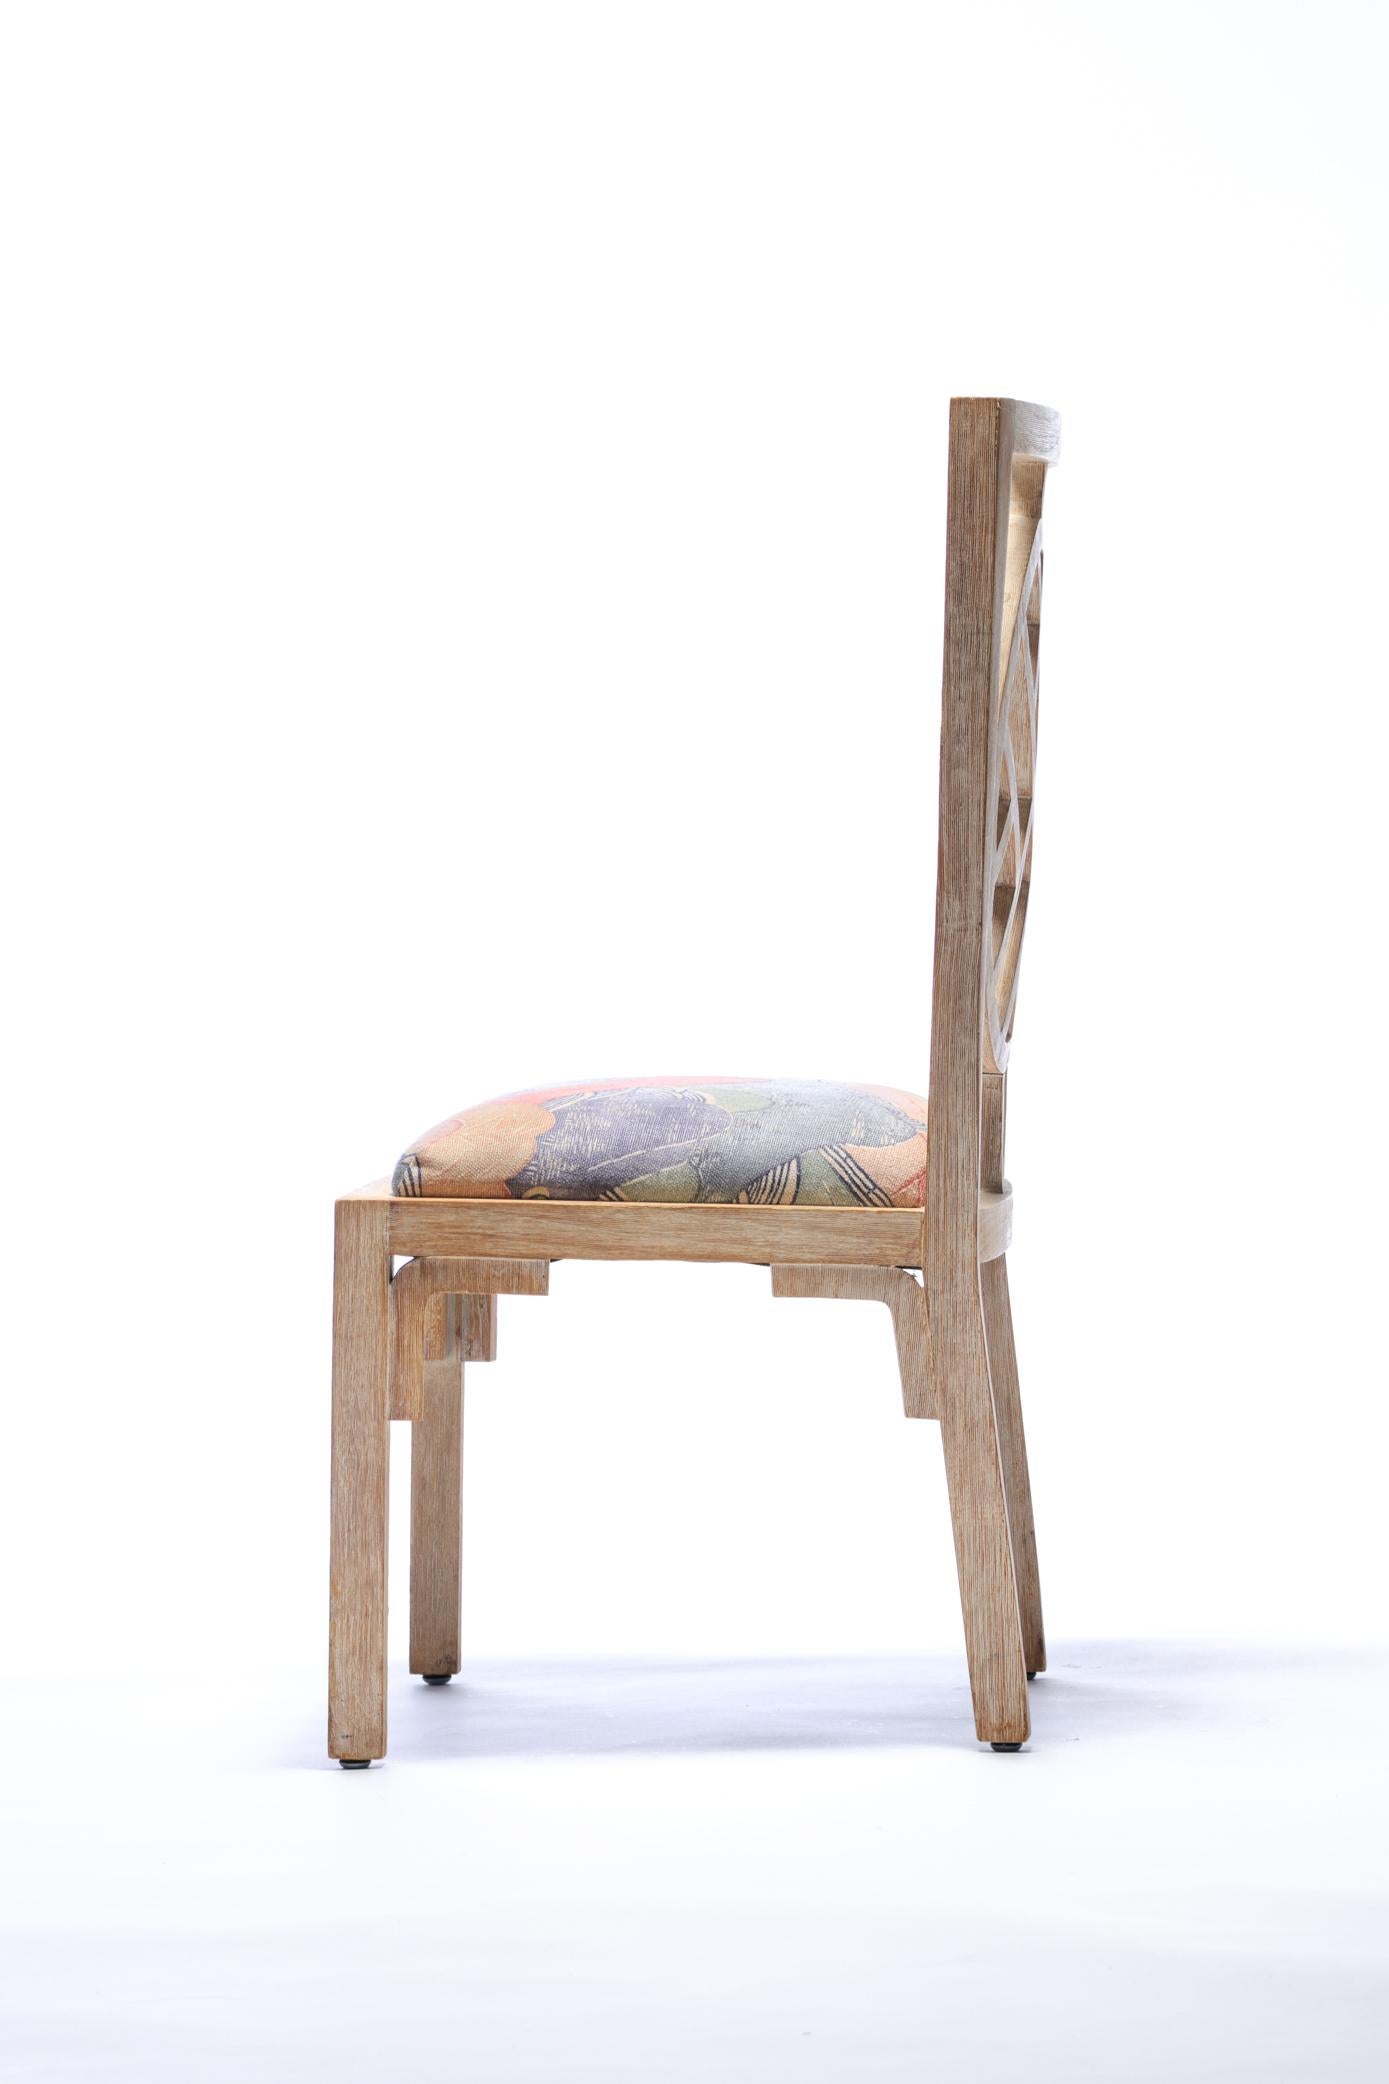 Wood Asian Modern Side Chair from Viceroy Miami '4 Available'